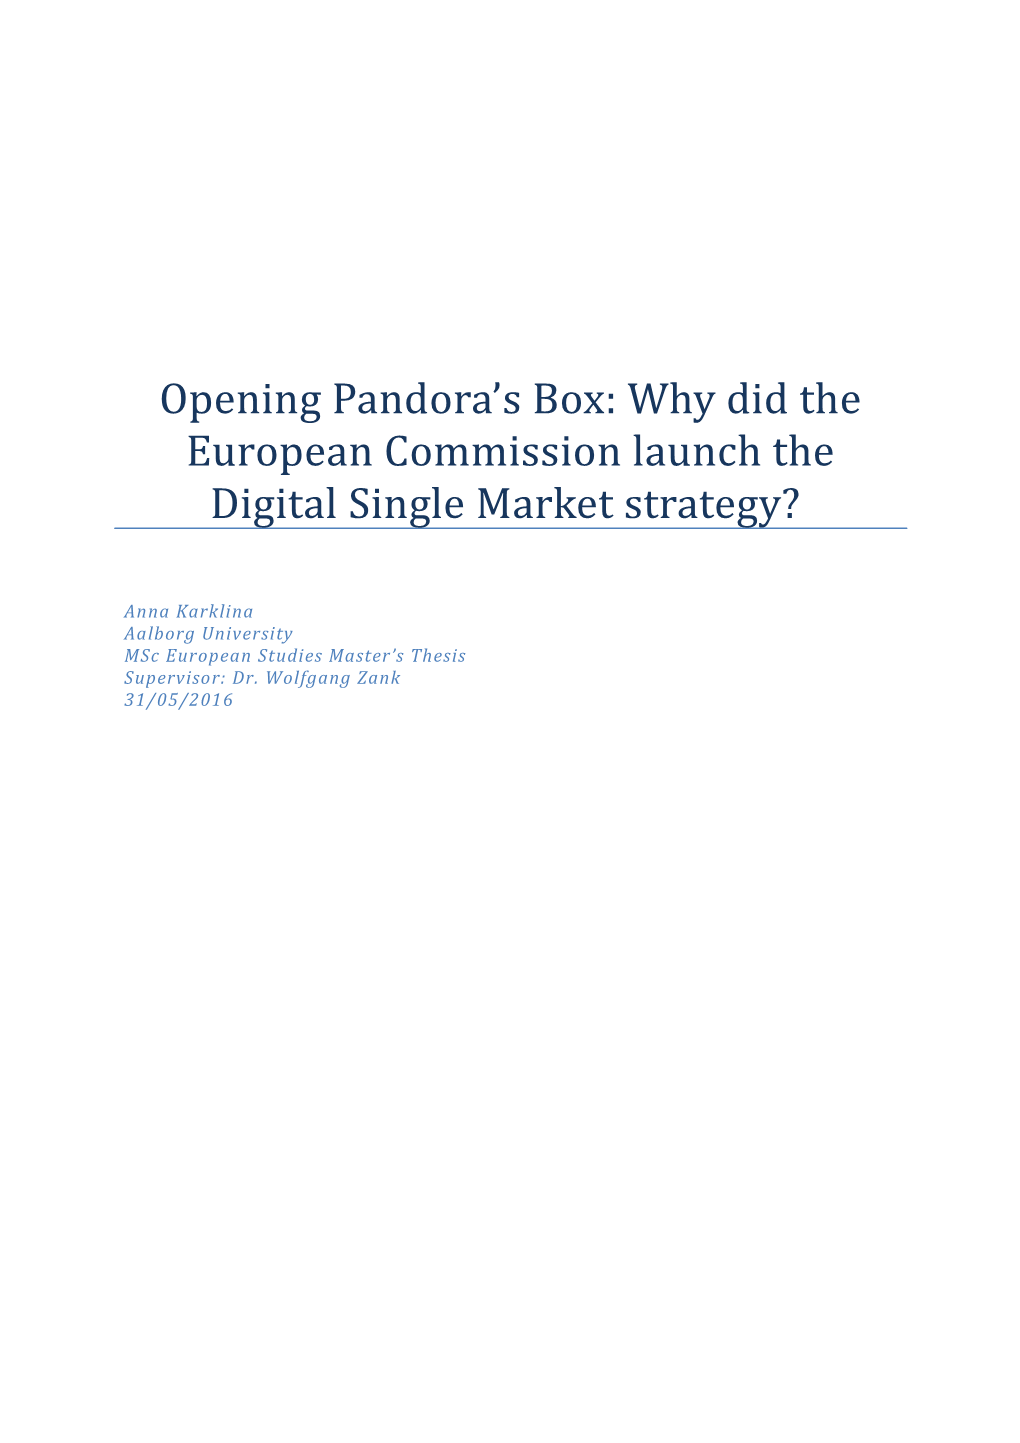 Opening Pandora S Box: Why Did the European Commission Launch the Digital Single Market